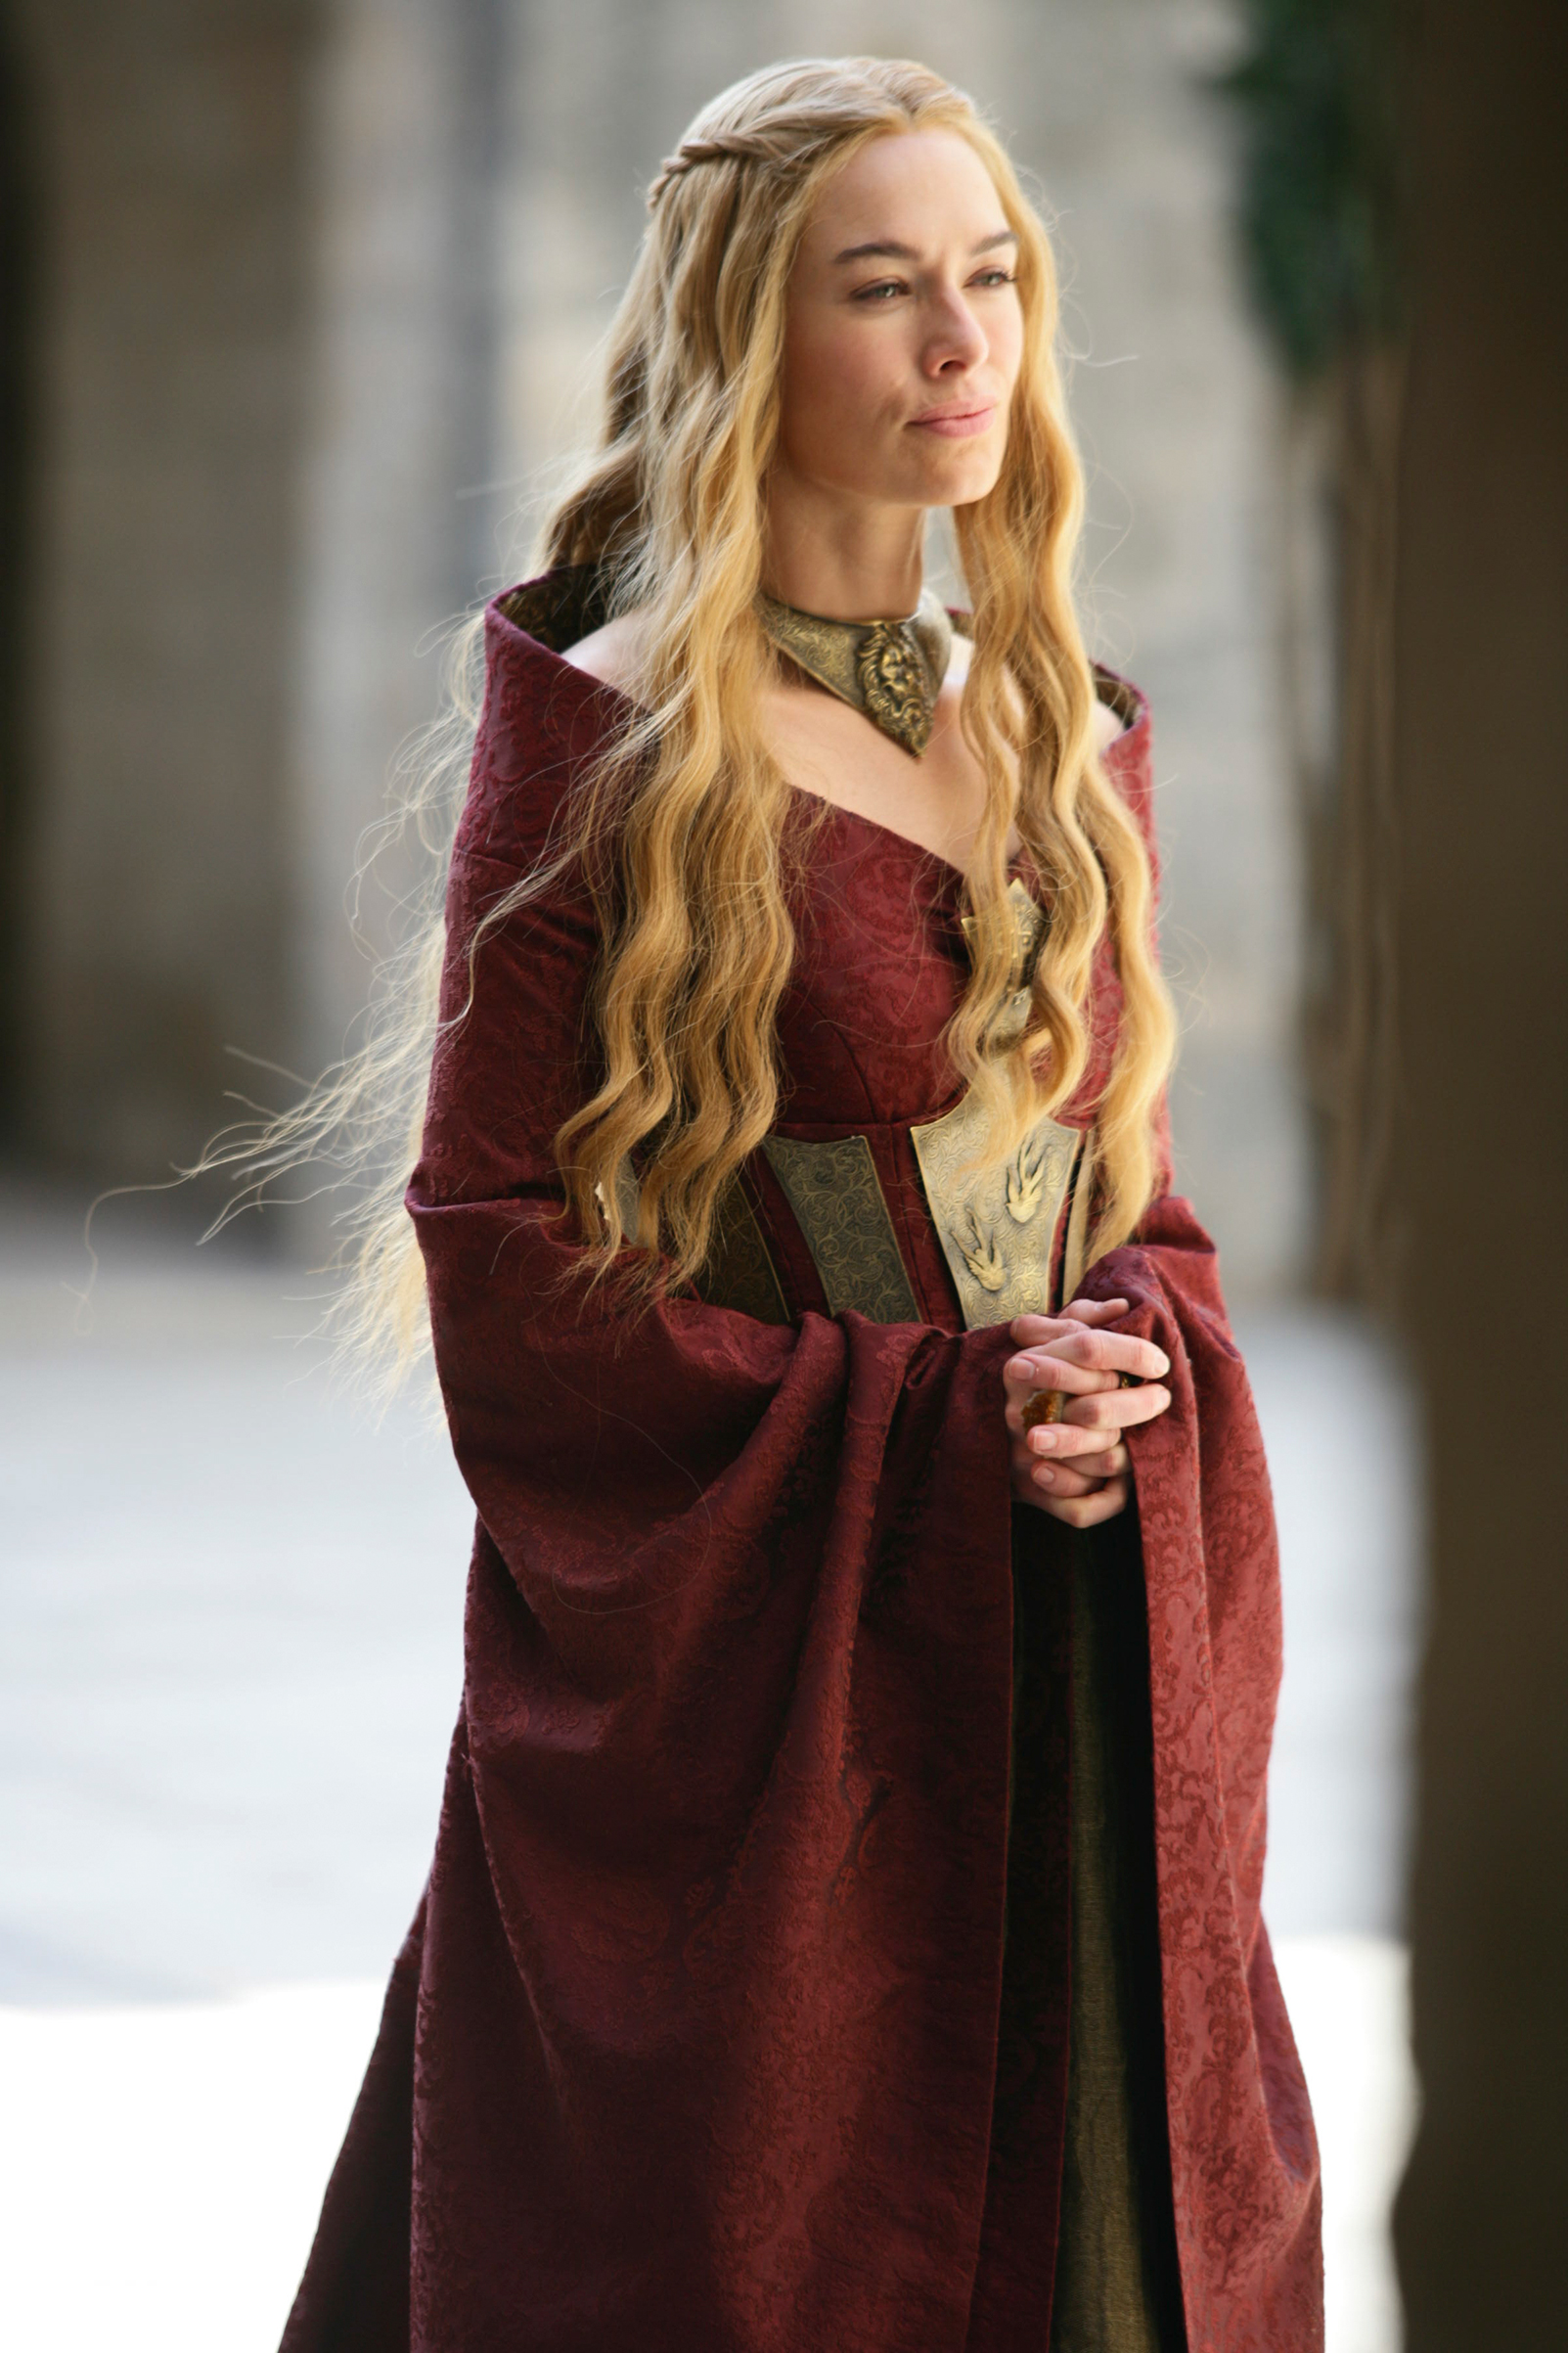 Top 10 most beautiful Game of Thrones actresses - Cersei Lannister